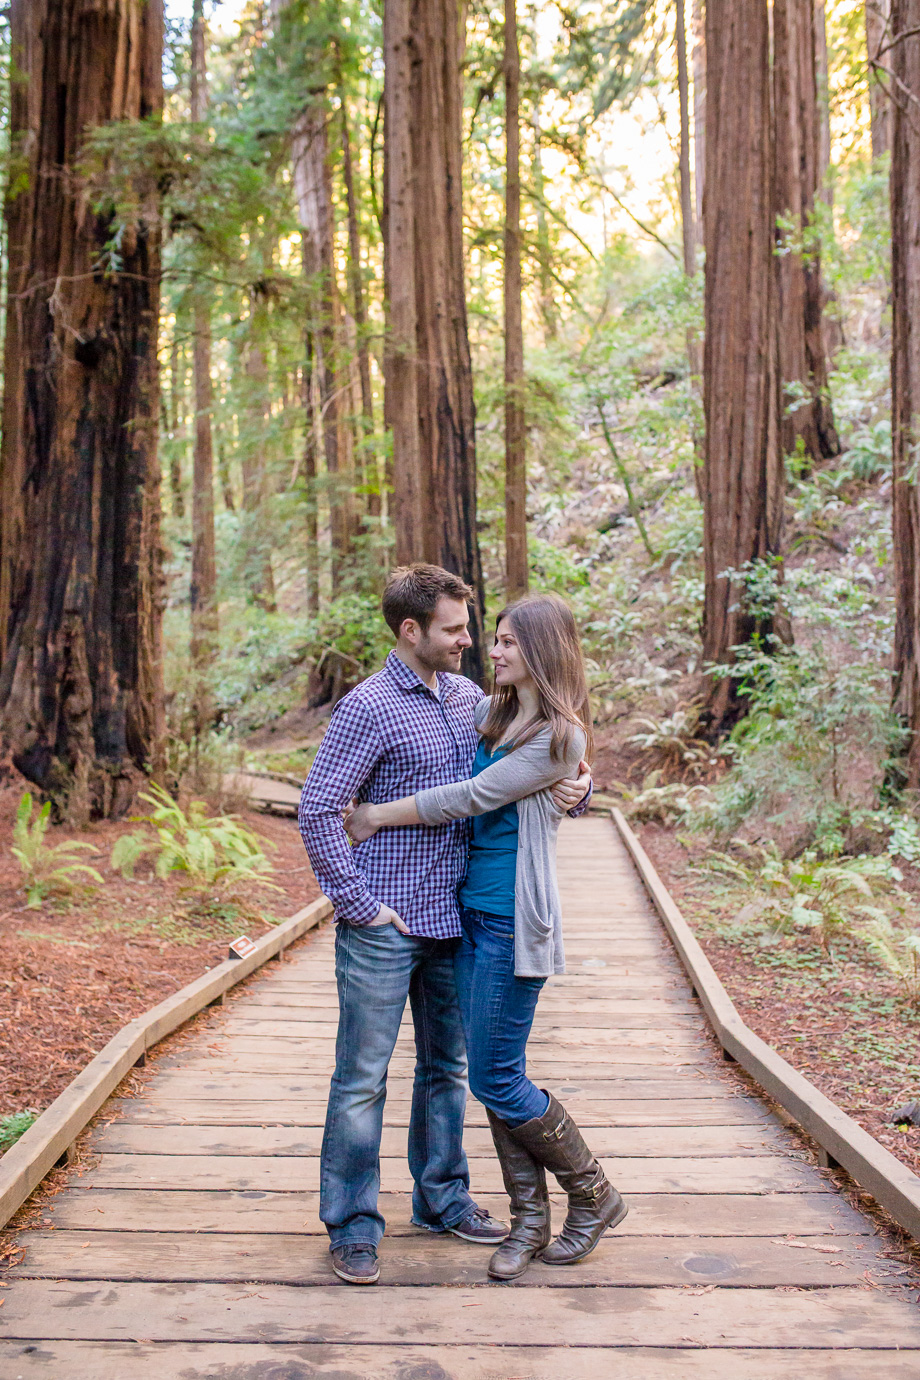 muir woods national park engagement photo on the hiking trail